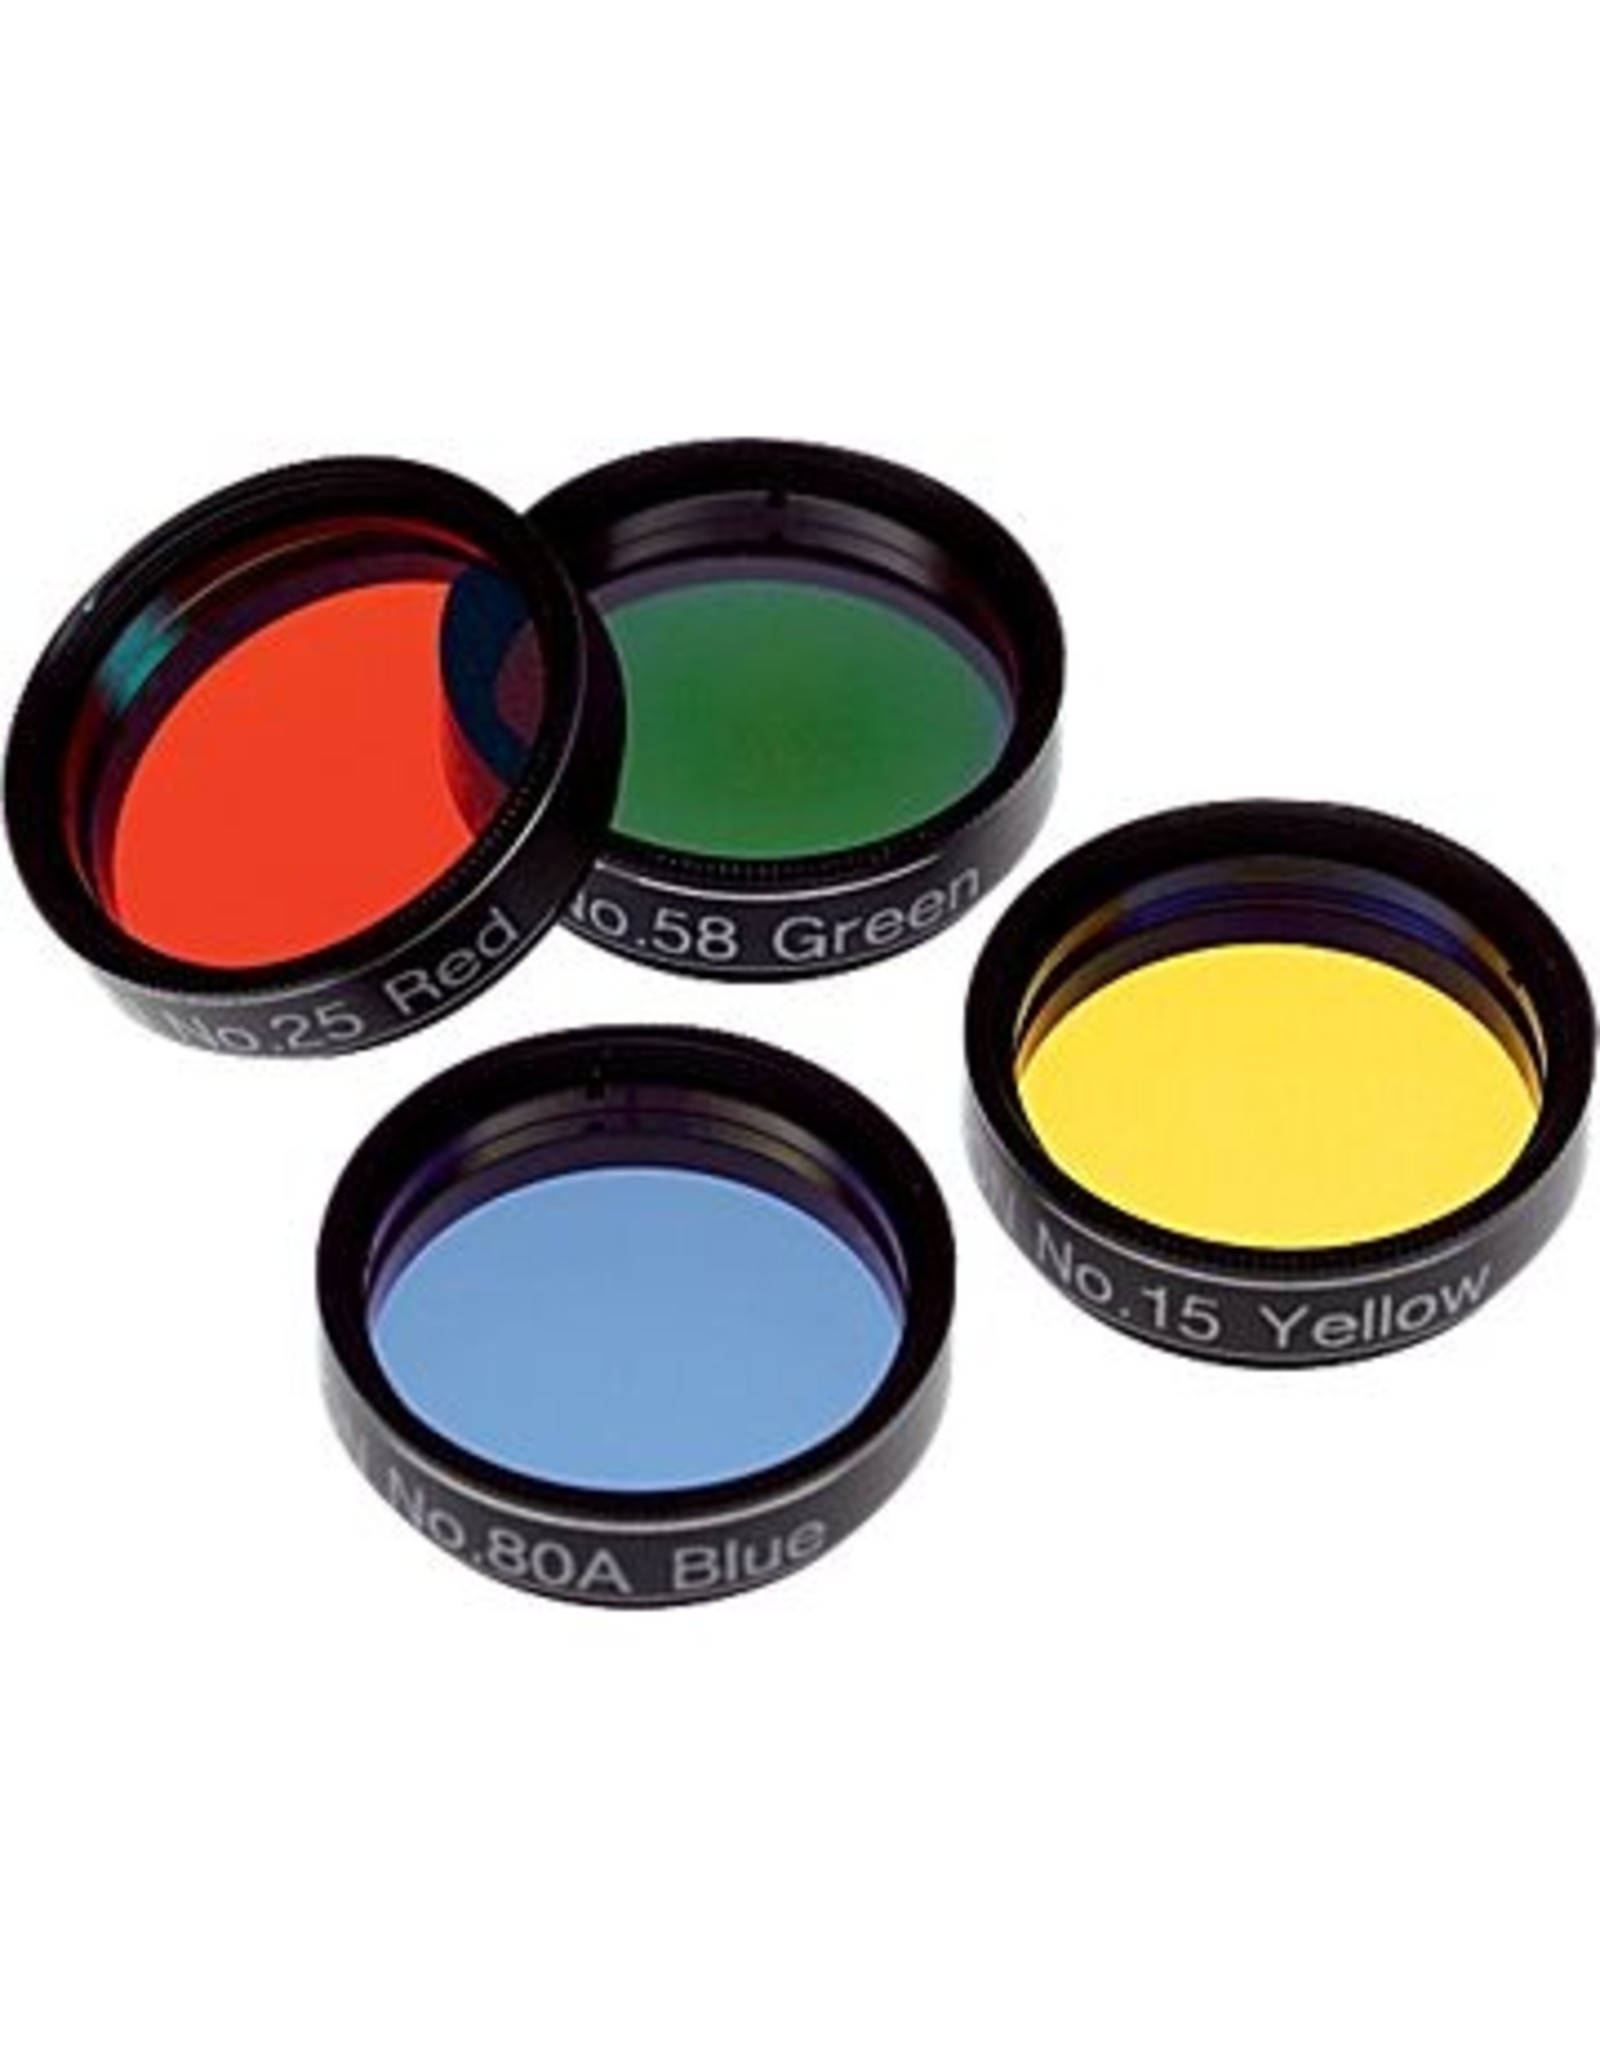 Orion 1.25" Basic Set of Four Color Filters #05514 (Pre-owned)